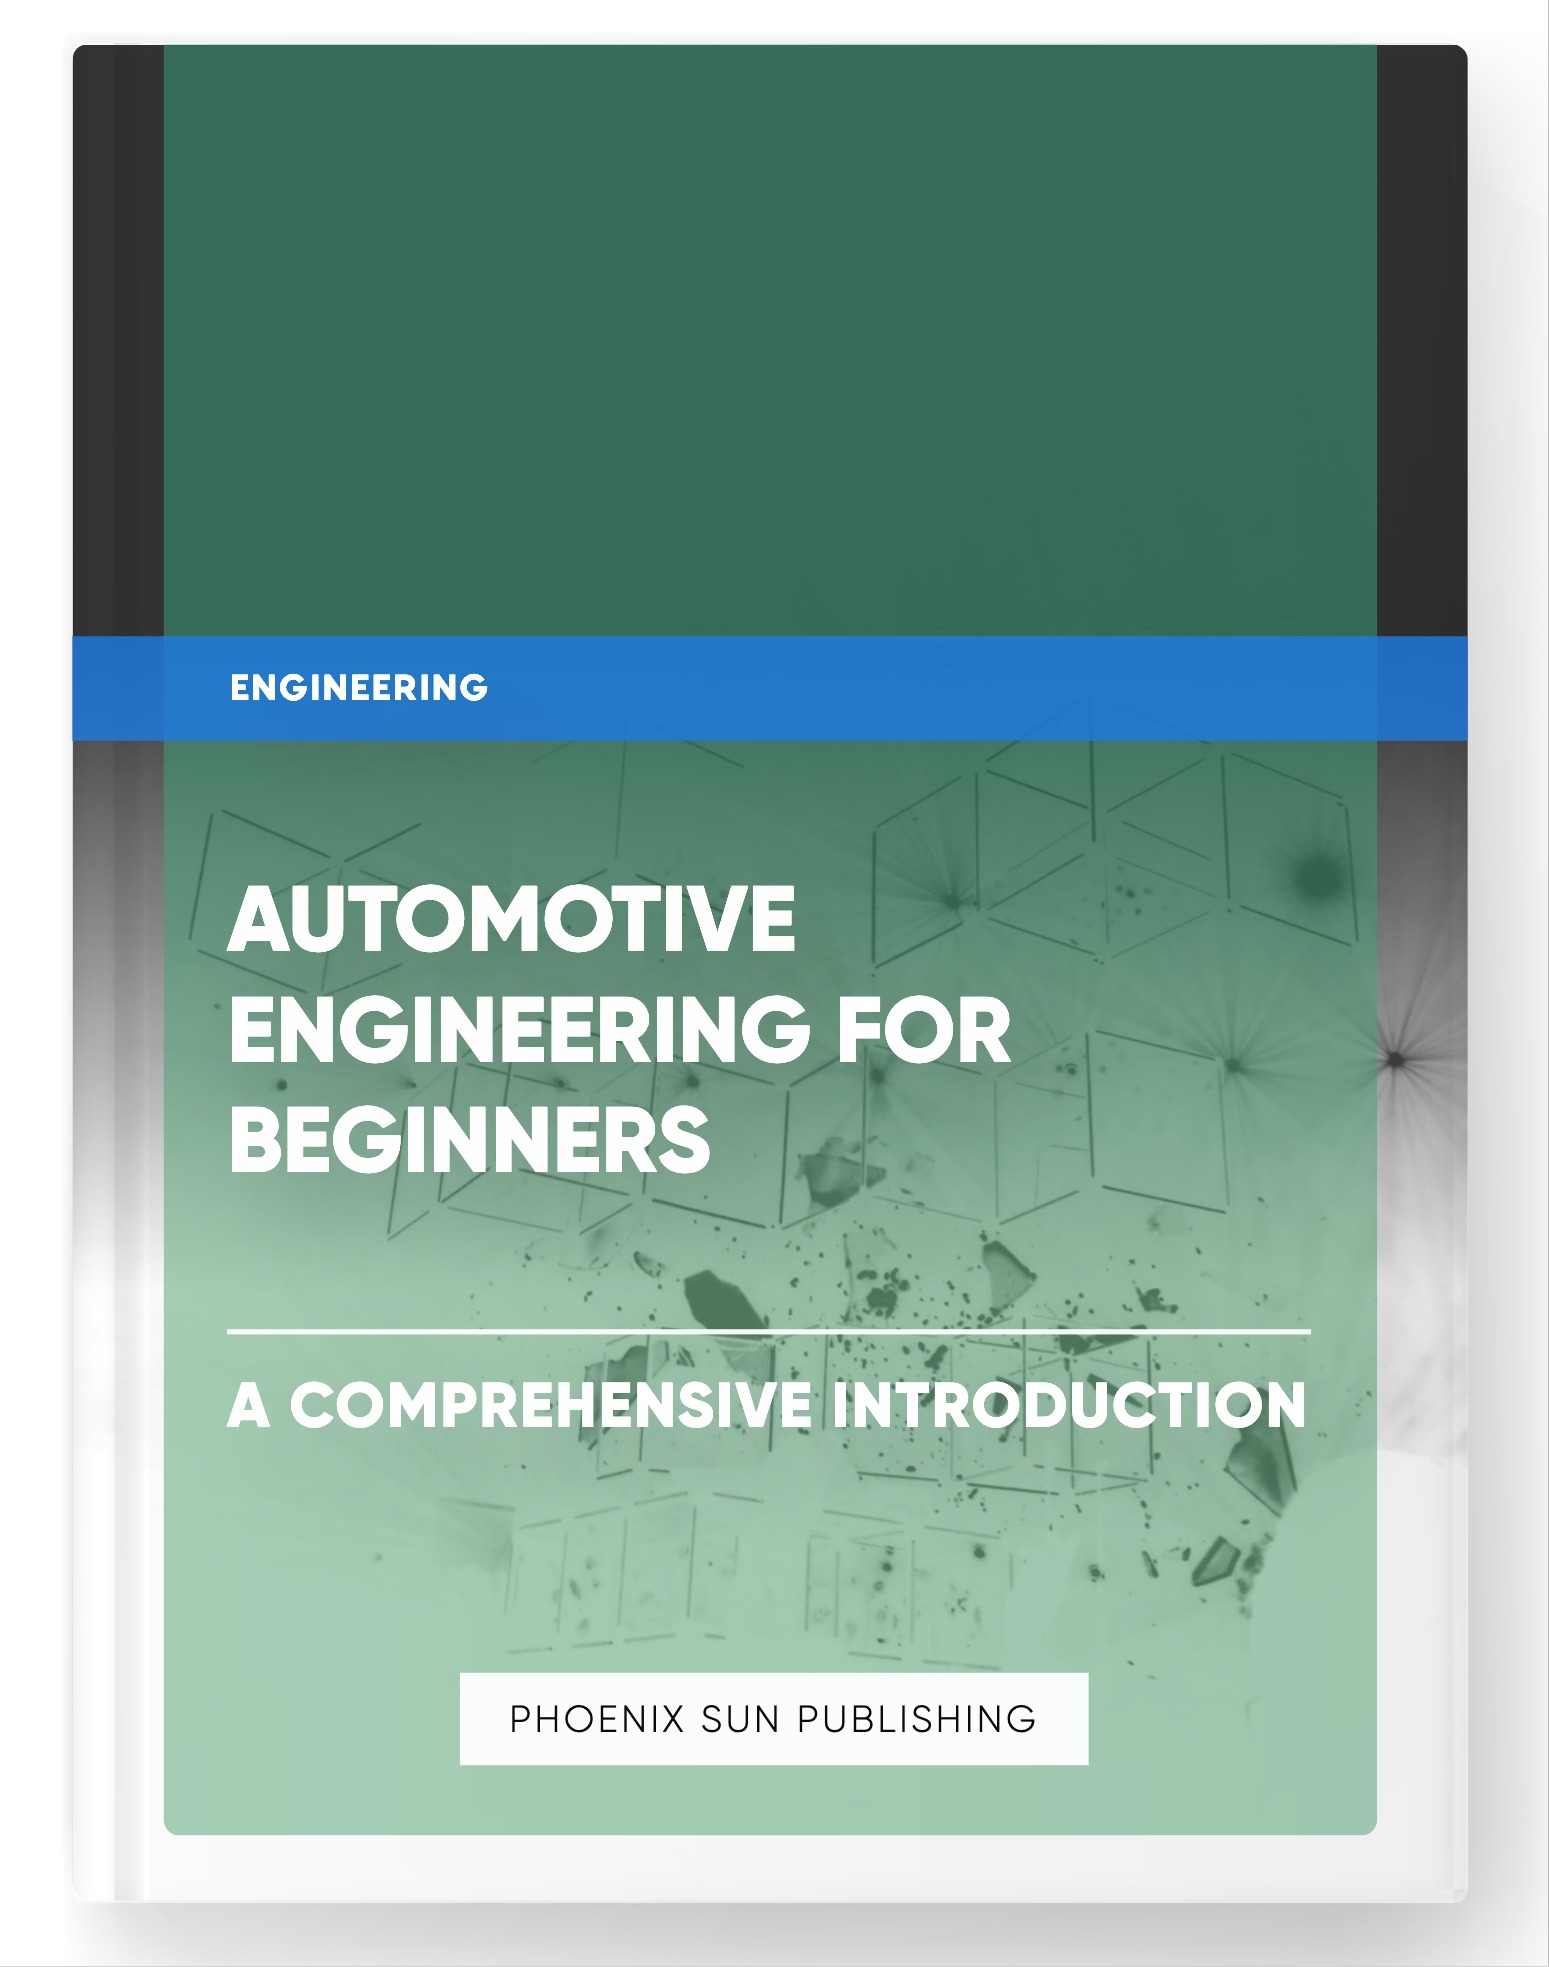 Automotive Engineering for Beginners – A Comprehensive Introduction